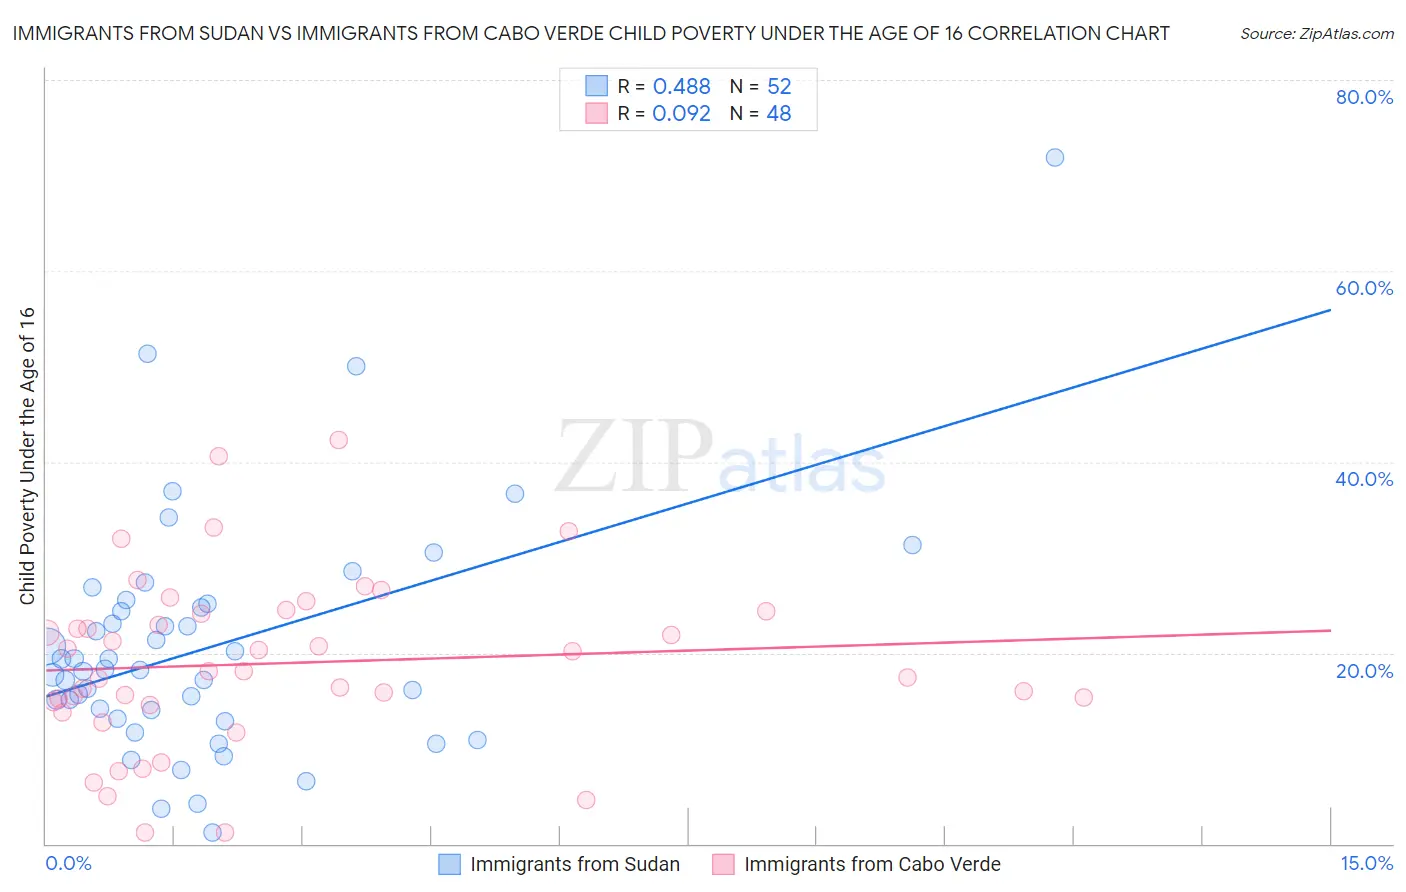 Immigrants from Sudan vs Immigrants from Cabo Verde Child Poverty Under the Age of 16